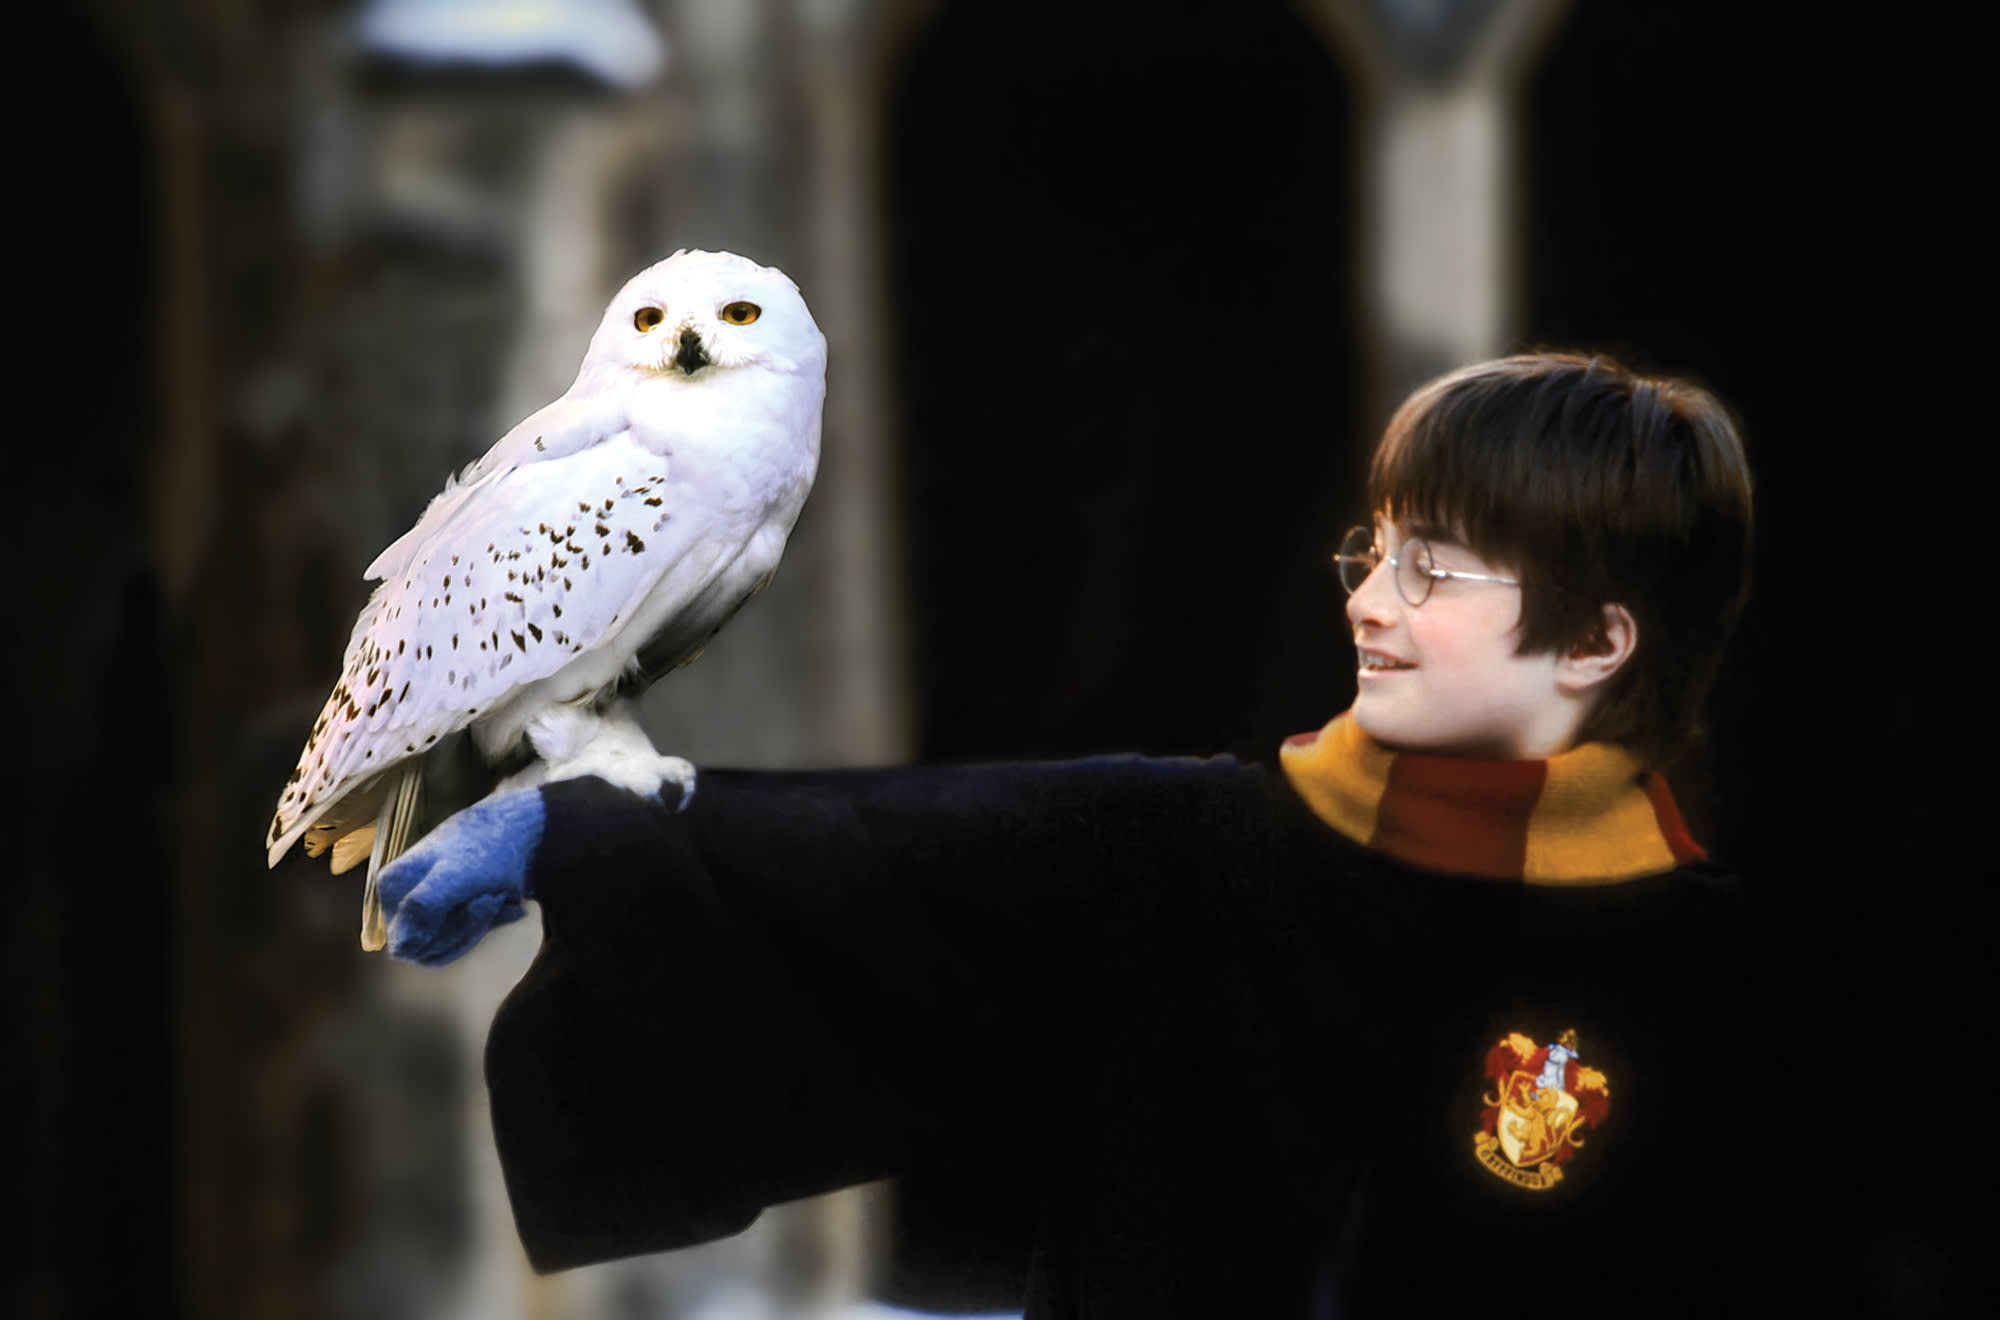 Harry stood outside in his Hogwarts robes and Gryffindor scarf with Hedwig perched on his arm.